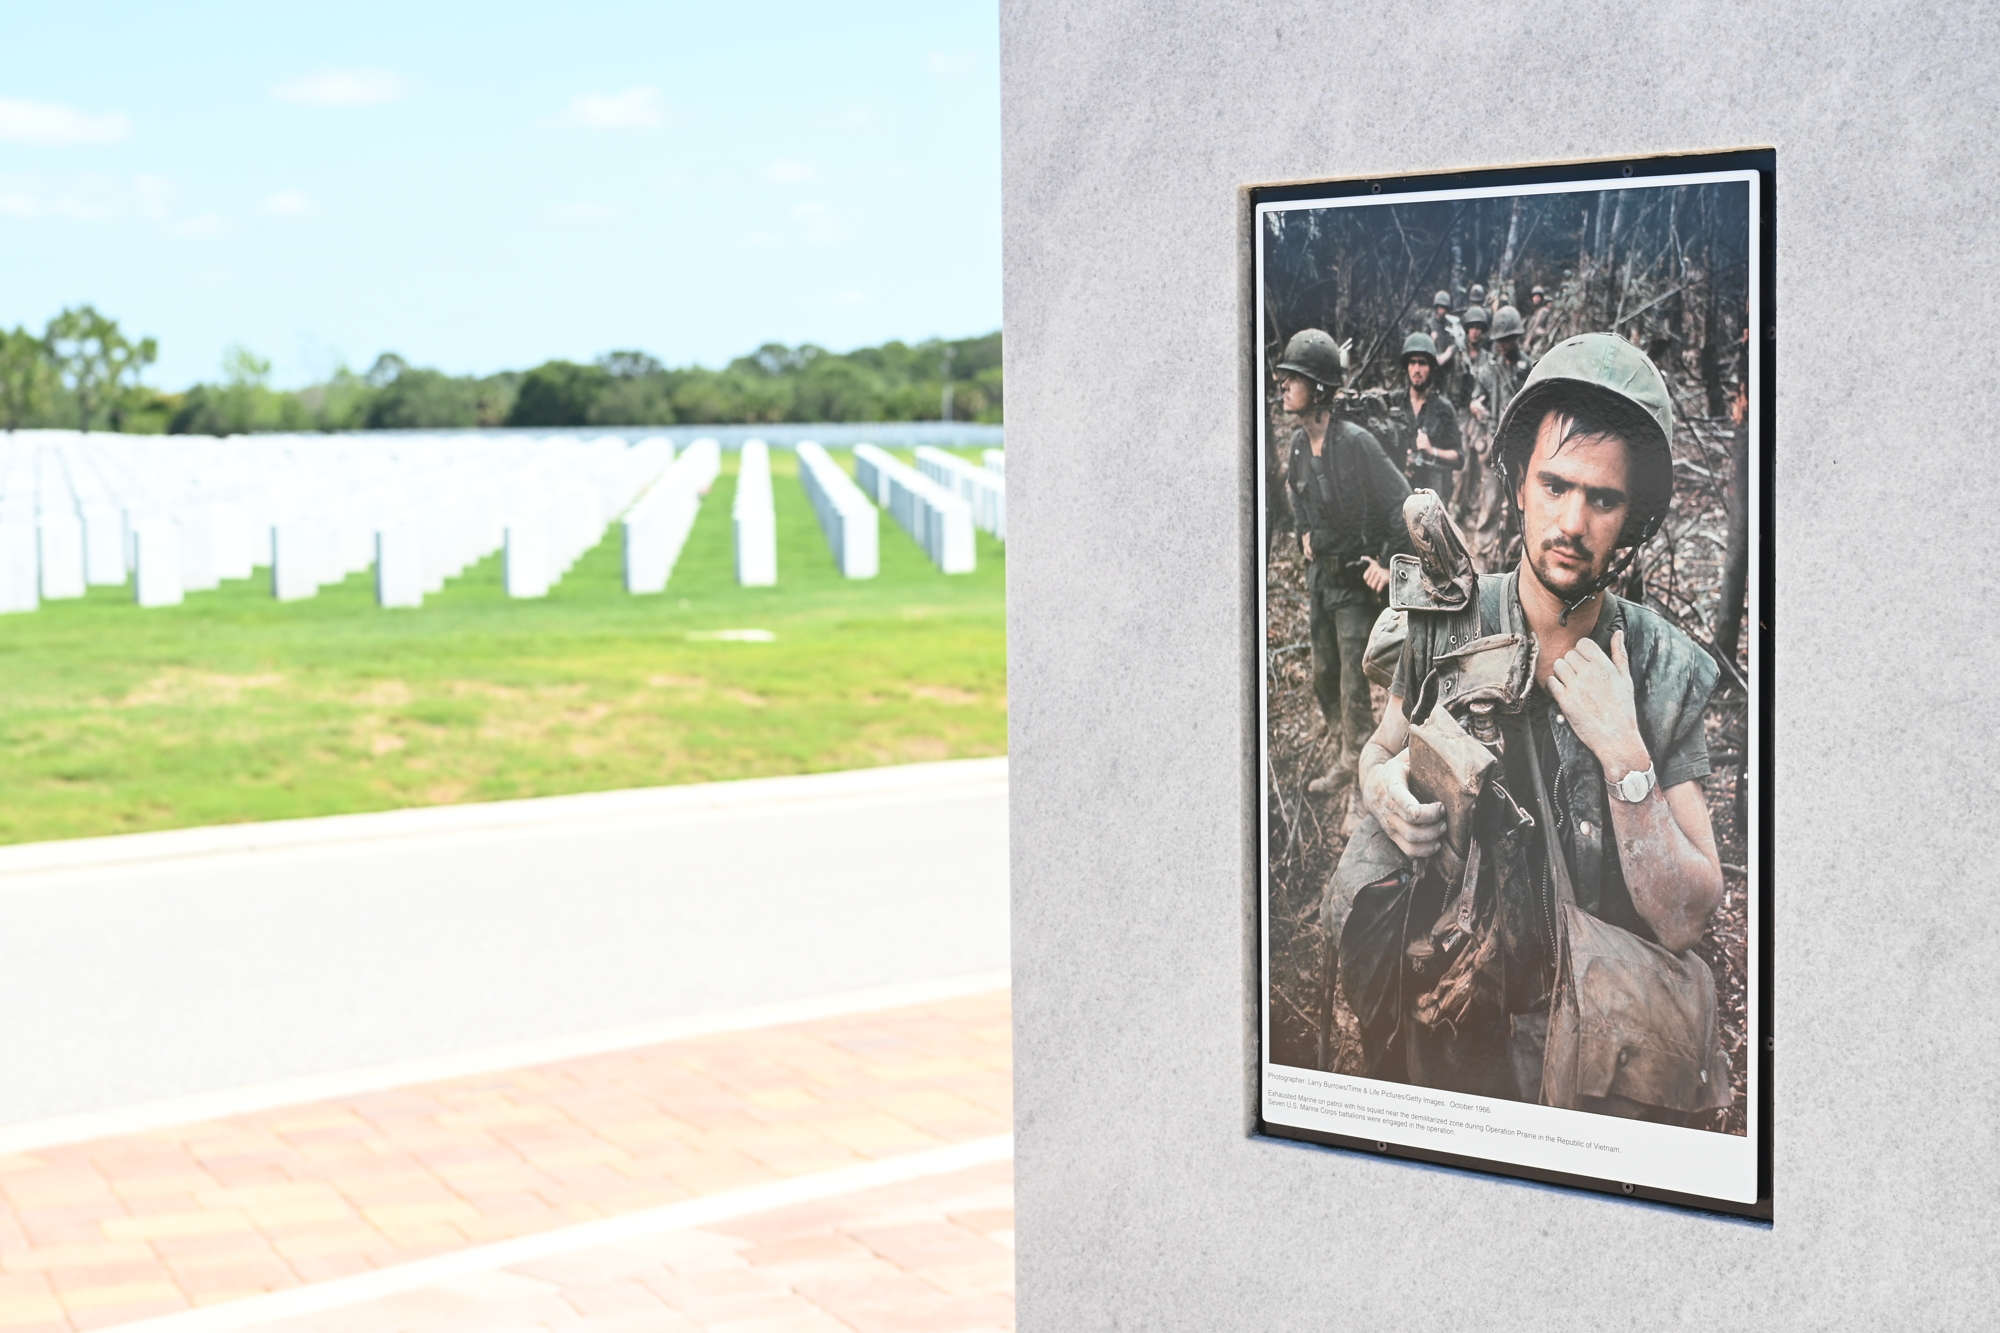 Larry Kirkland's Witness to Mission installation examines military themes throughout history. (Photo: Spencer Fordin)